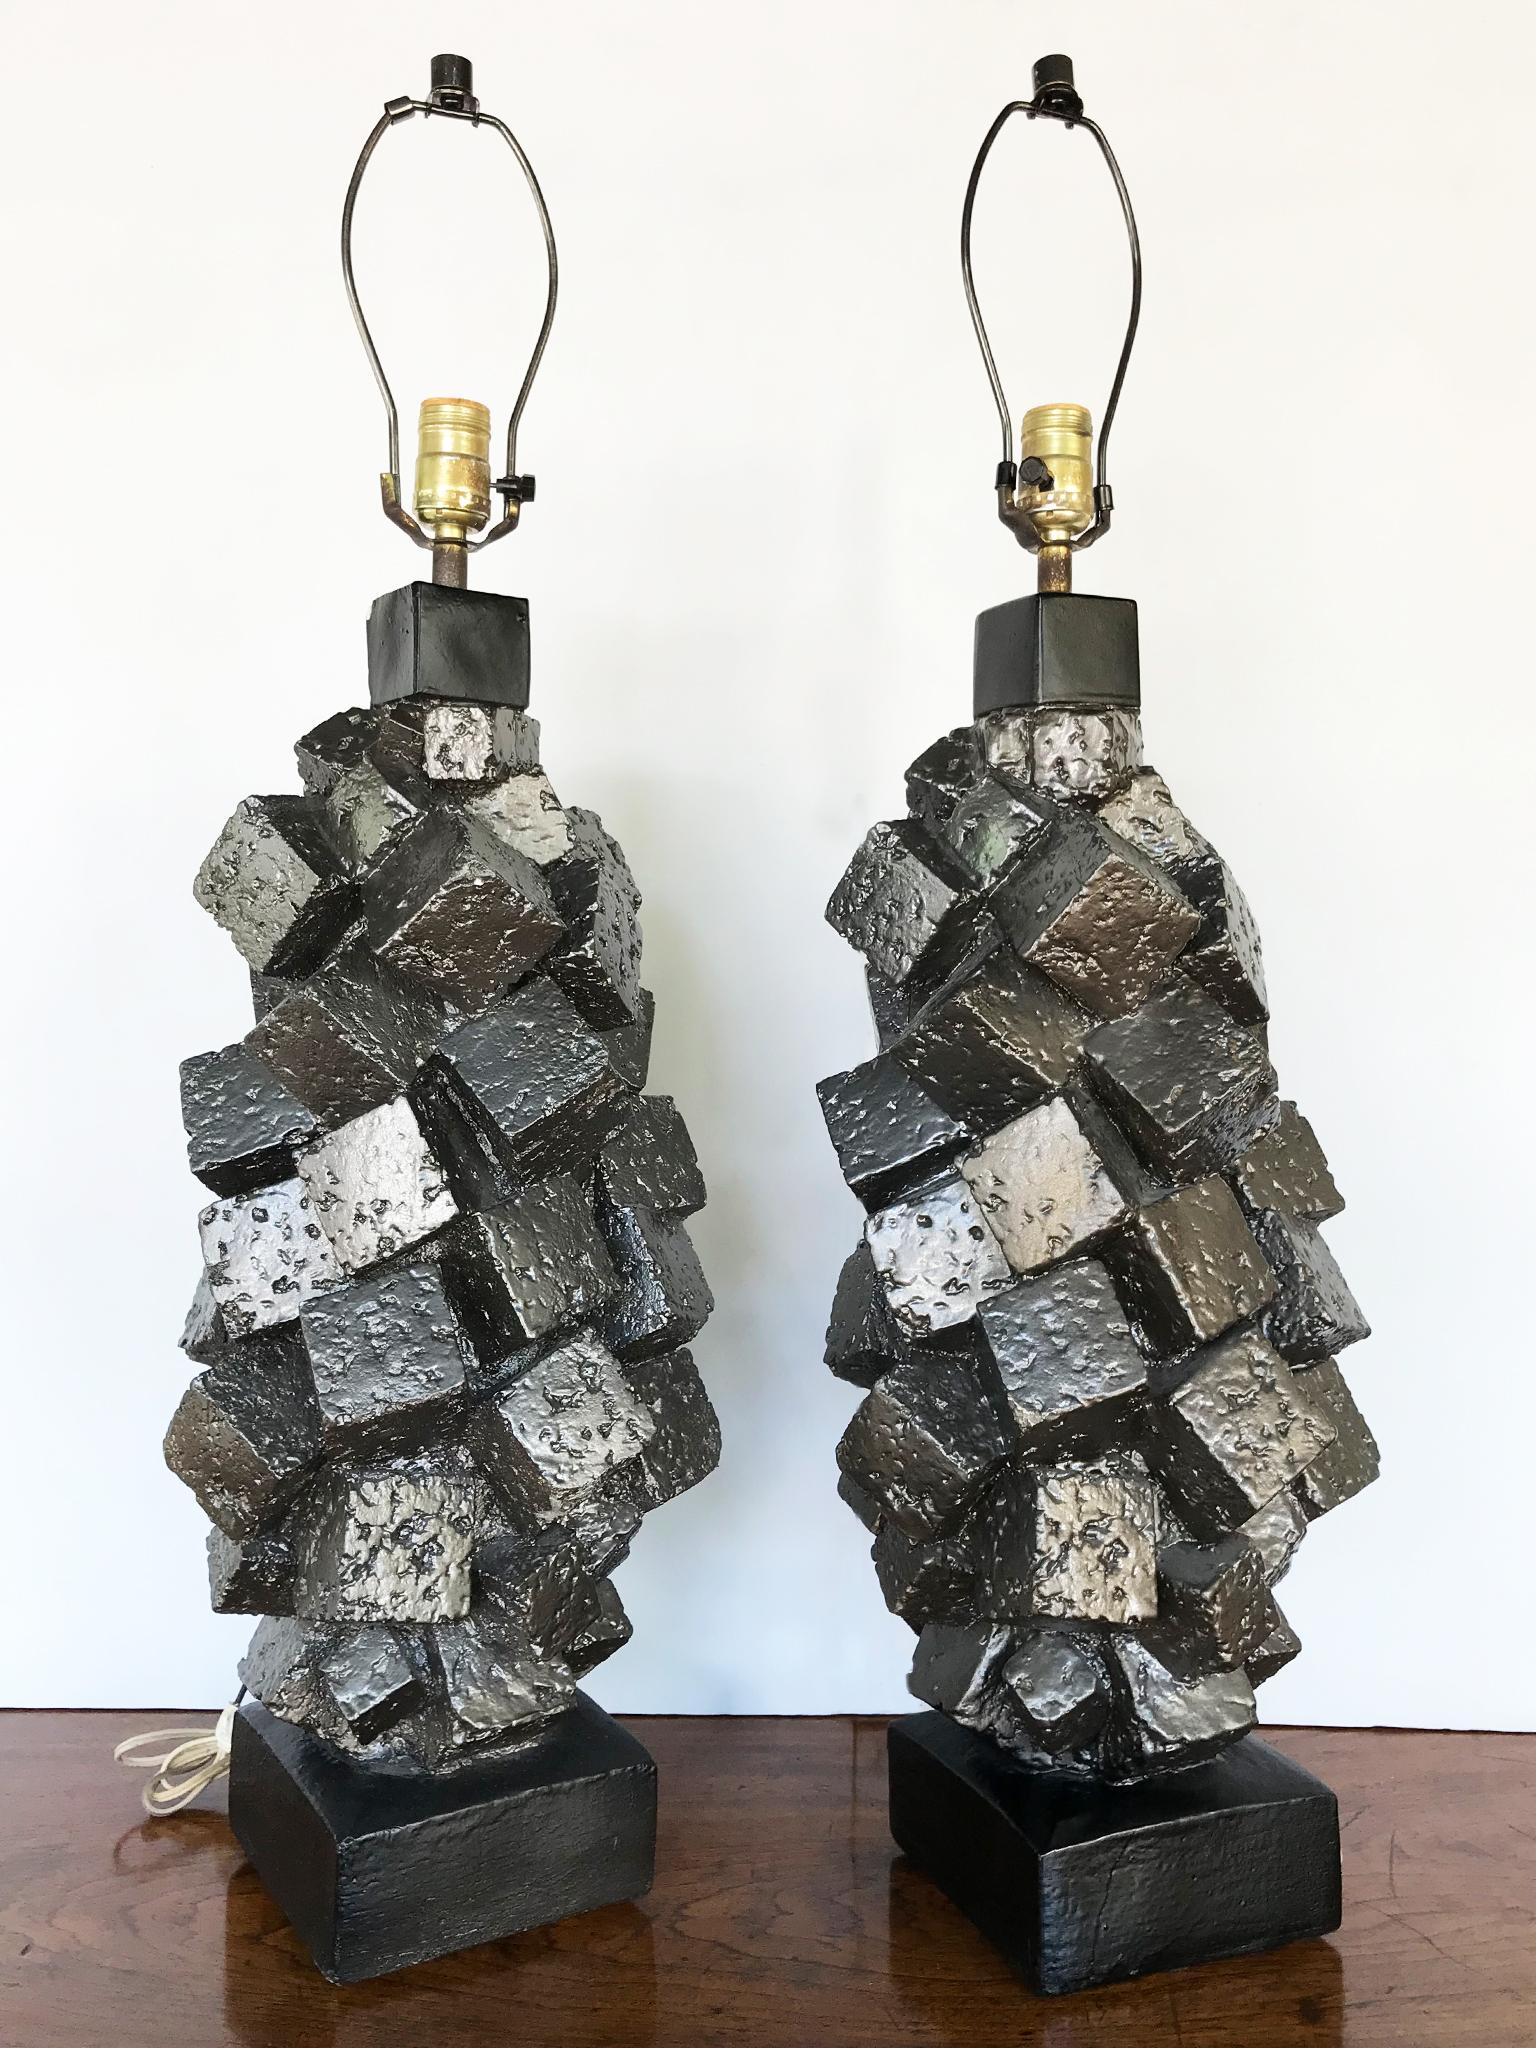 A curious pair of brutalist table lamps comprising of glazed cast plaster. Mid-20th century these lamps are remarkable for their unusual cube forms, which are made to appear as clusters of magnetized metal. The silver metallic glaze adds to this